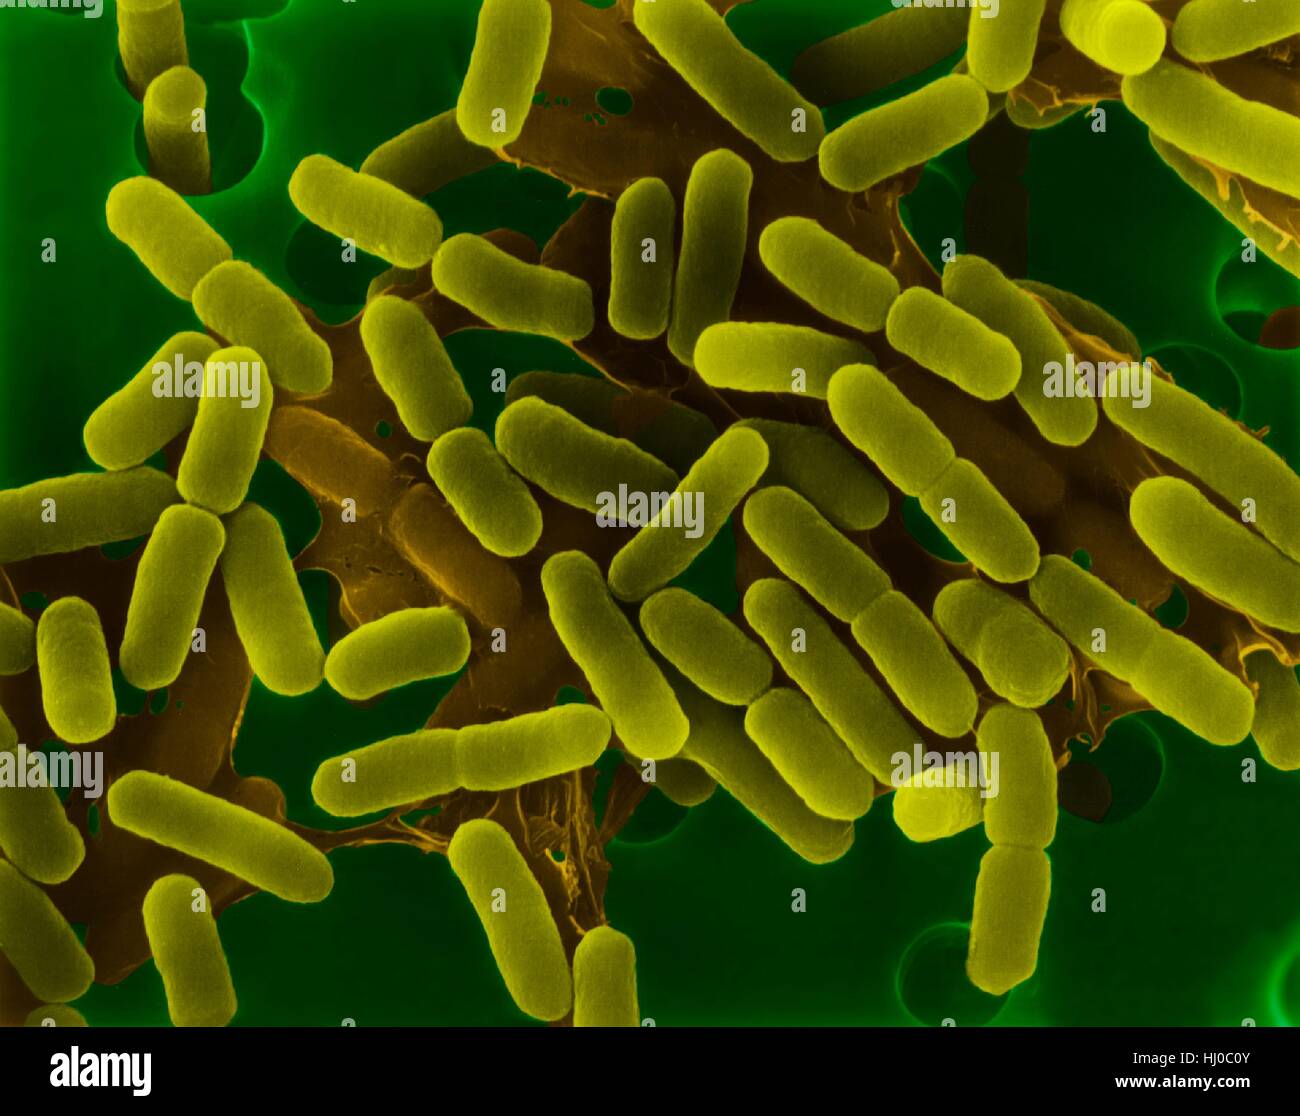 Coloured scanning electron micrograph (SEM) of Escherichia coli is a Gram-negative, facultatively anaerobic, enteric, rod prokaryote. This bacterium was isolated from the human intestine and is normally a part of the human and animal microbiota. Most E. coli strains are harmless, but some strains can cause serious problems such as: food poisoning, urinary tract infections, traveller's diarrhoea and nosocomial infections. The E. coli 0157:H7 strain is fatal to humans if contracted when contaminated meat is cooked inadequately. Magnification: x2, 225 when shortest axis printed at 25 millimetres. Stock Photo